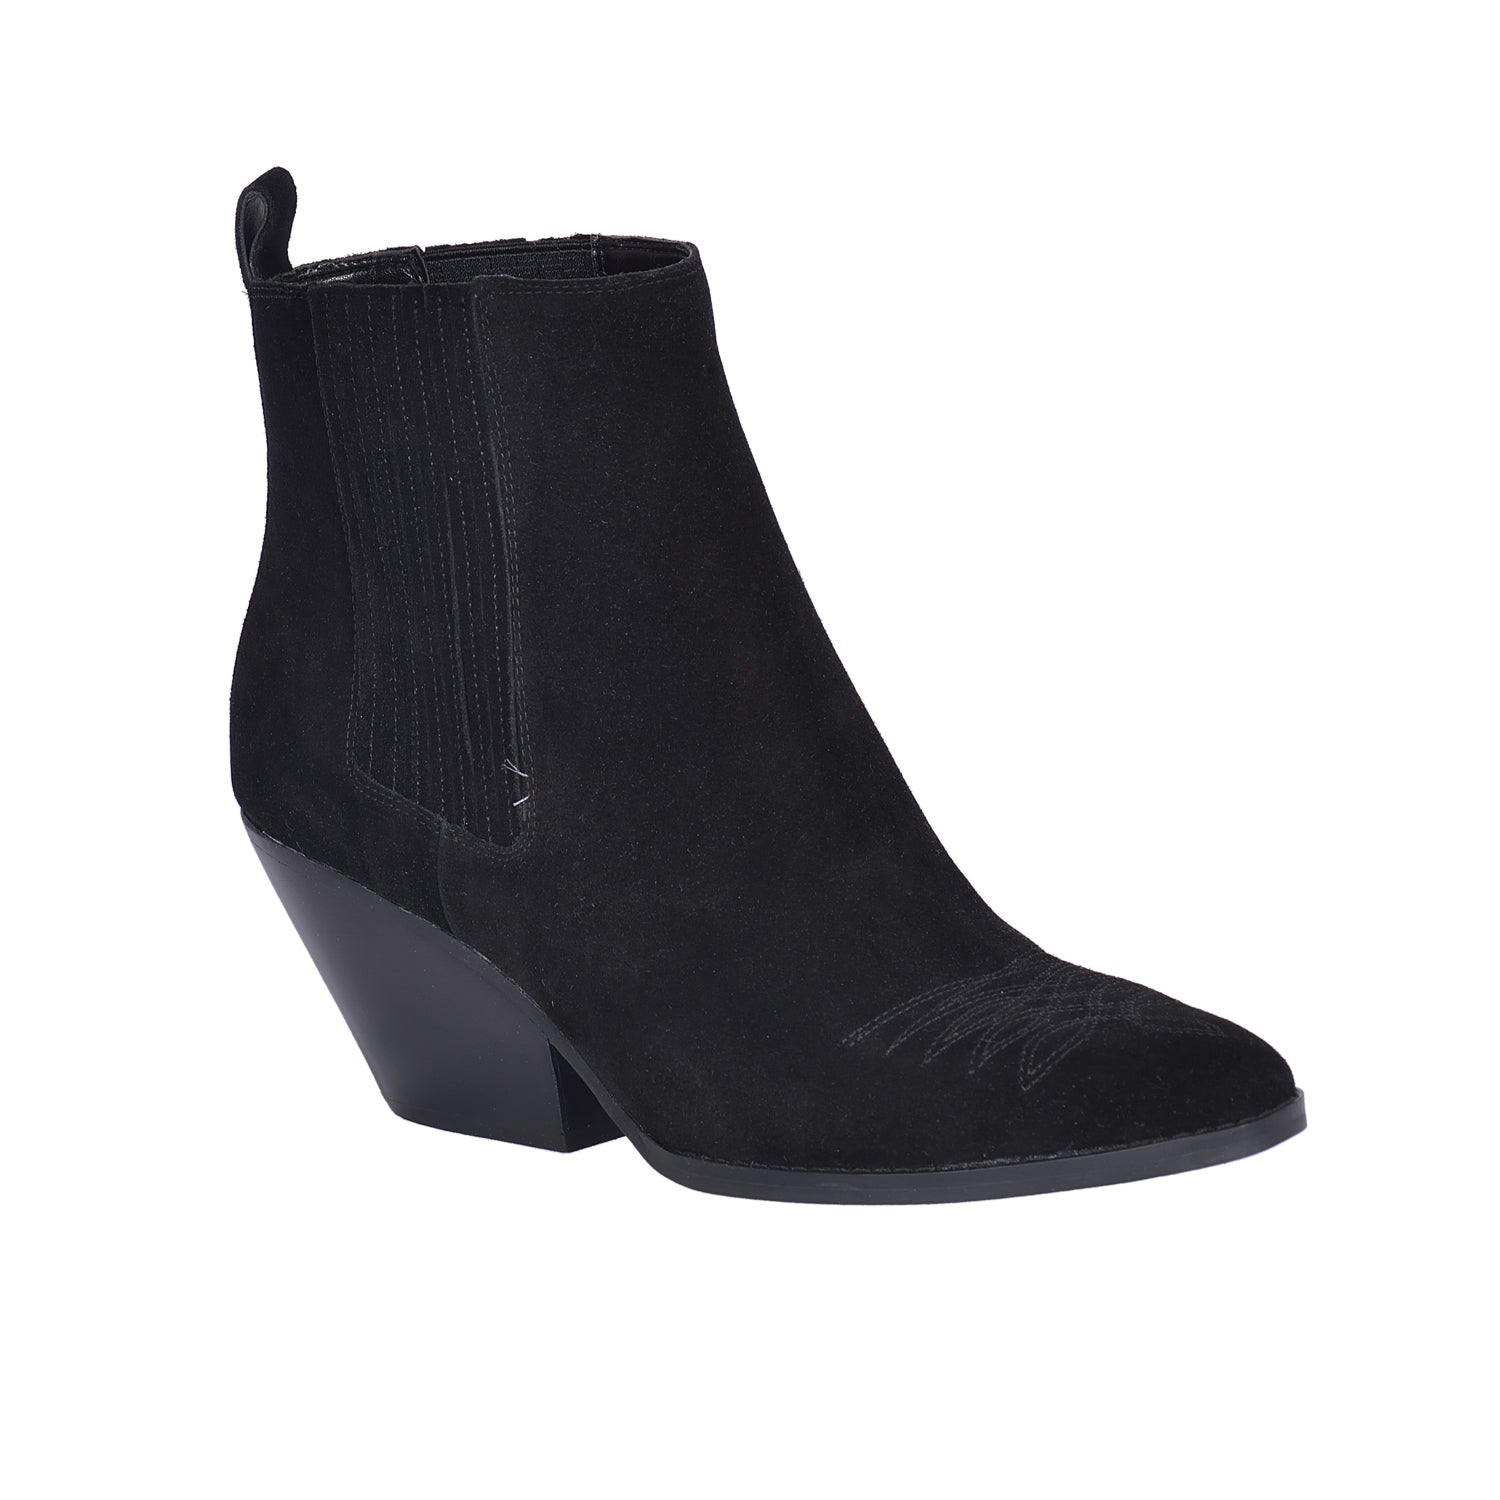 MICHAEL KORS Black Sinclair Heeled Ankle Boots